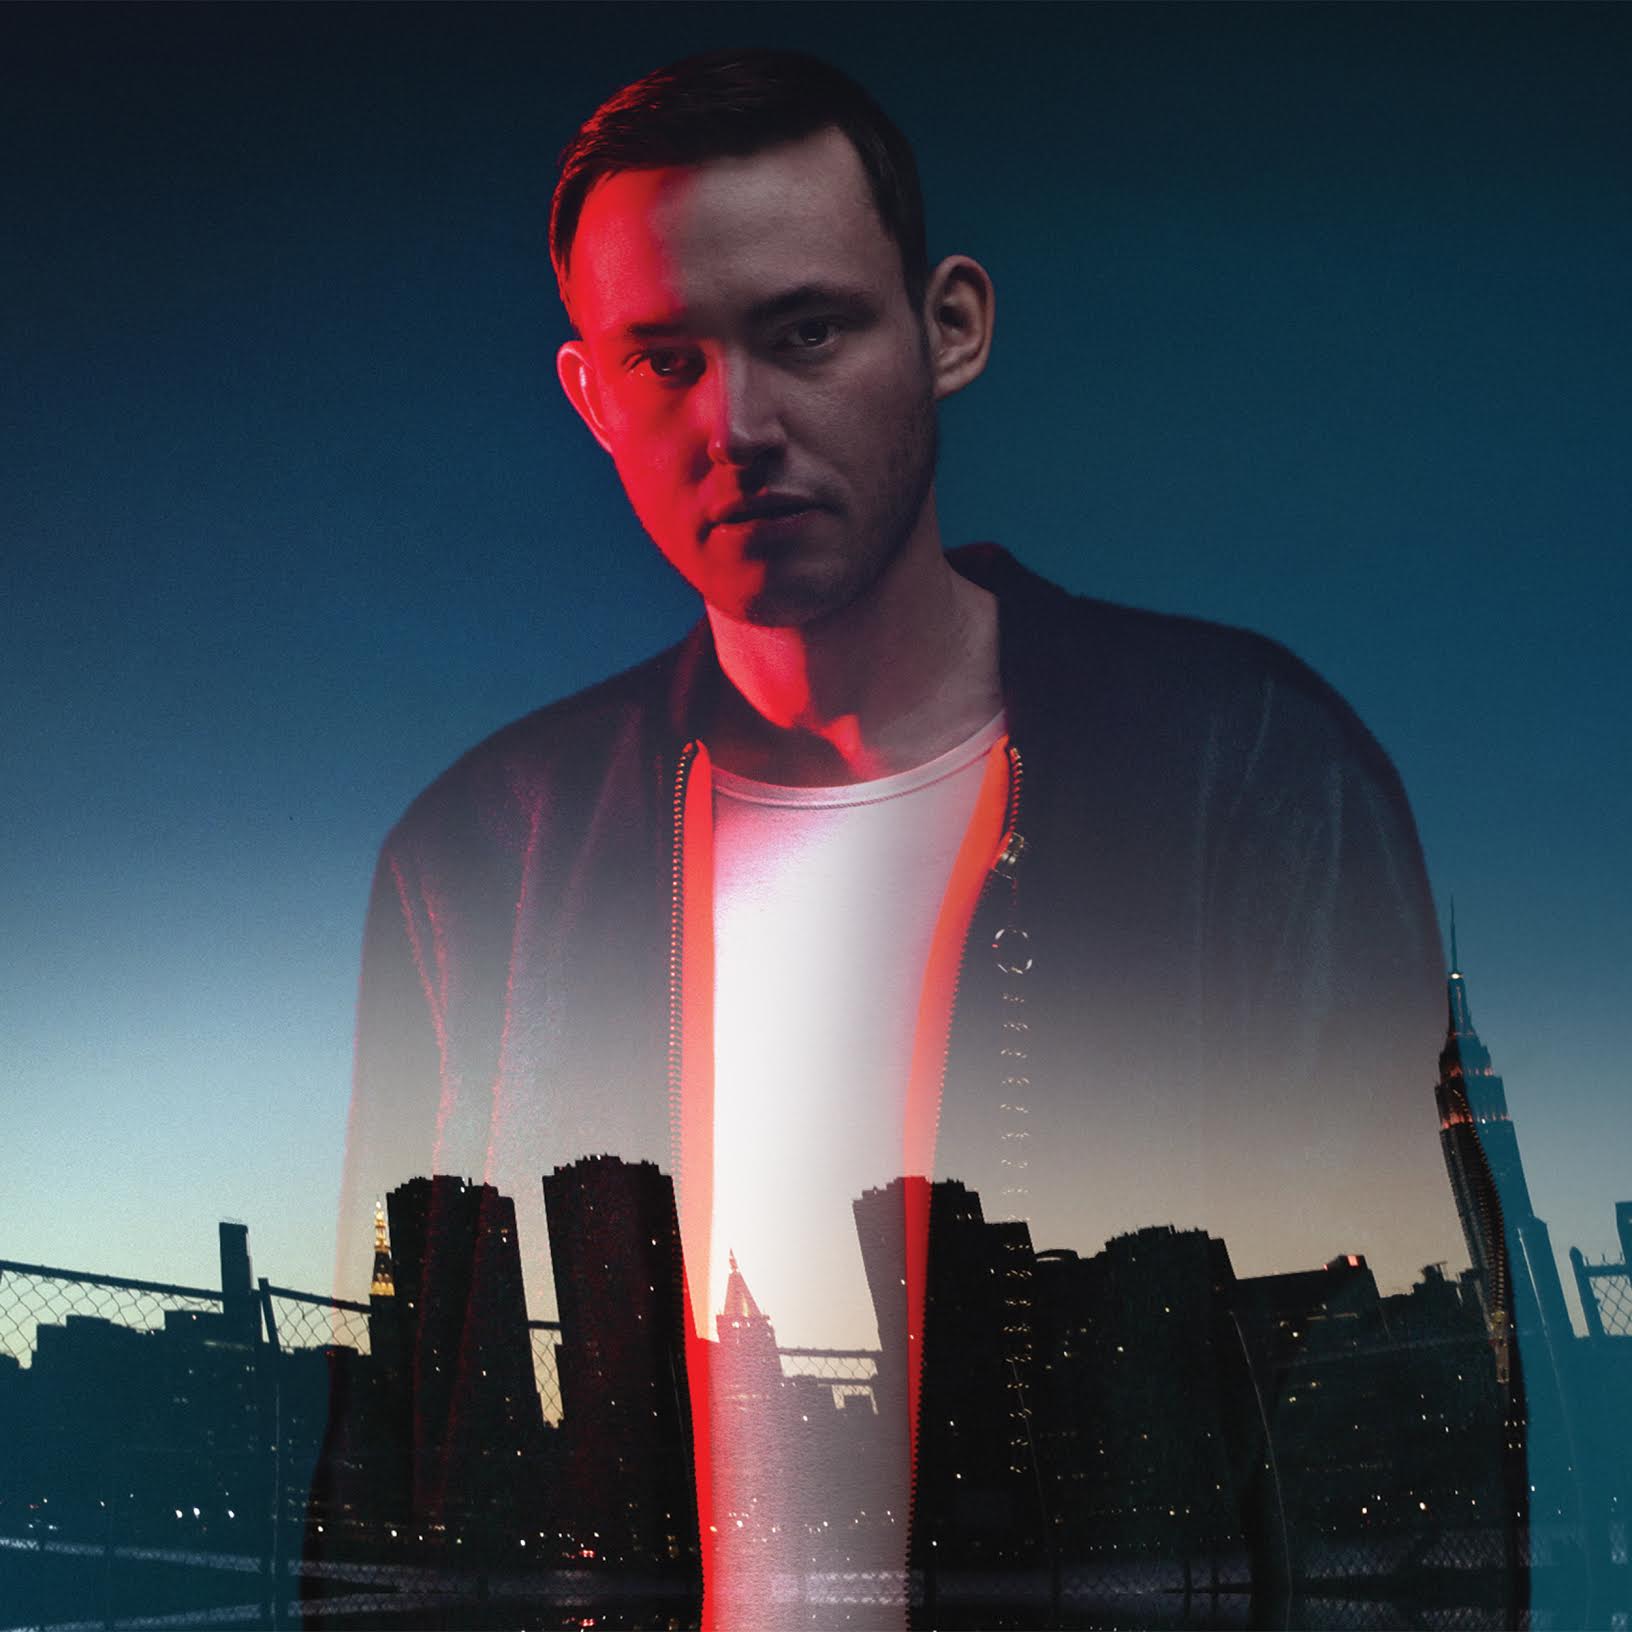 Hudson Mohawke debuts video for "Very First Breath."